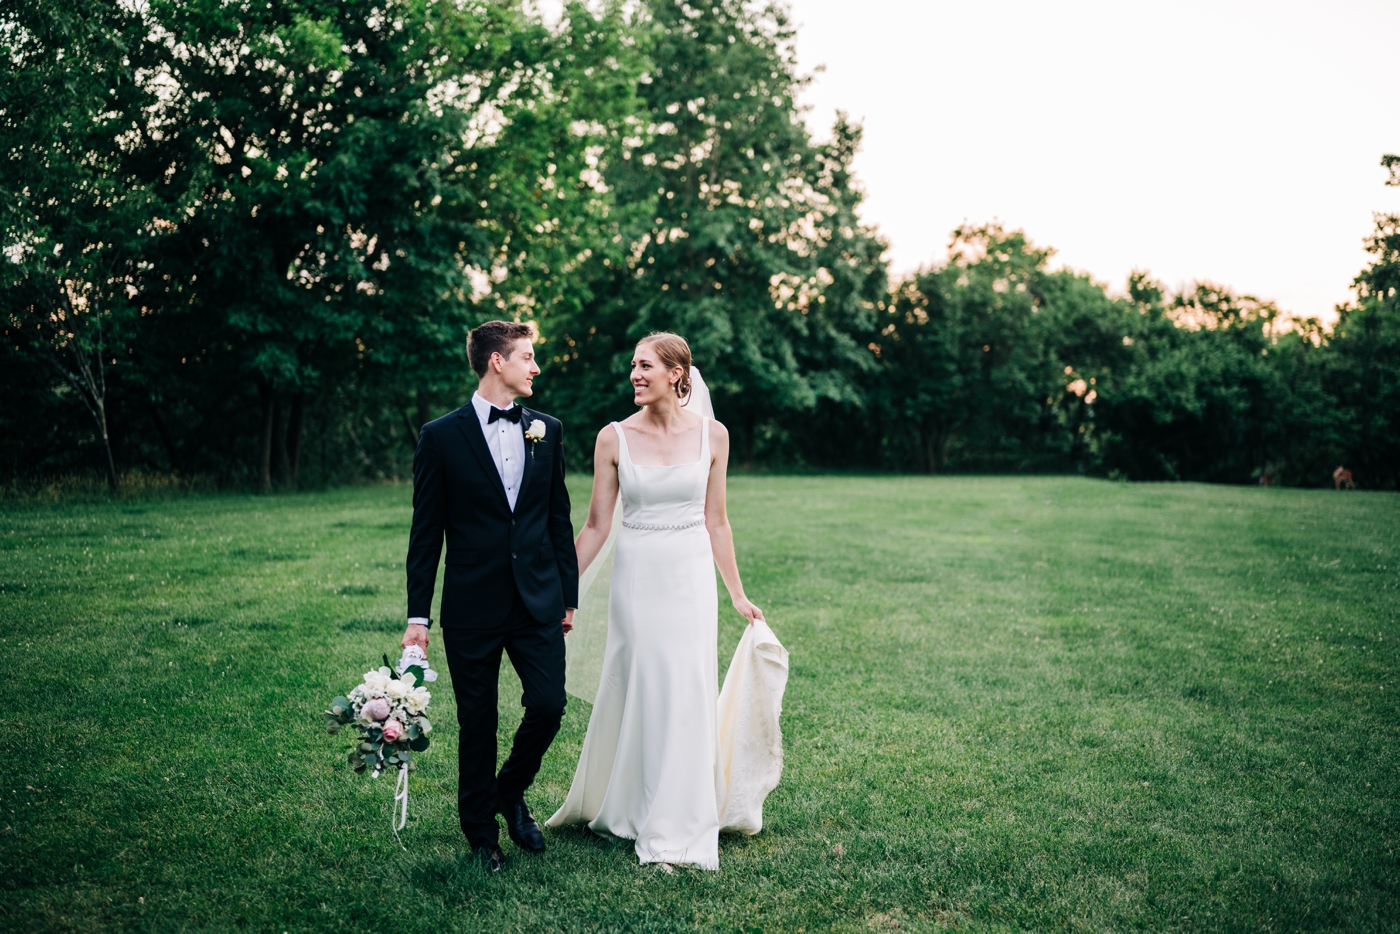 Bride & Groom Portraits at the North Shore of Pittsburgh by Mika LH Photography